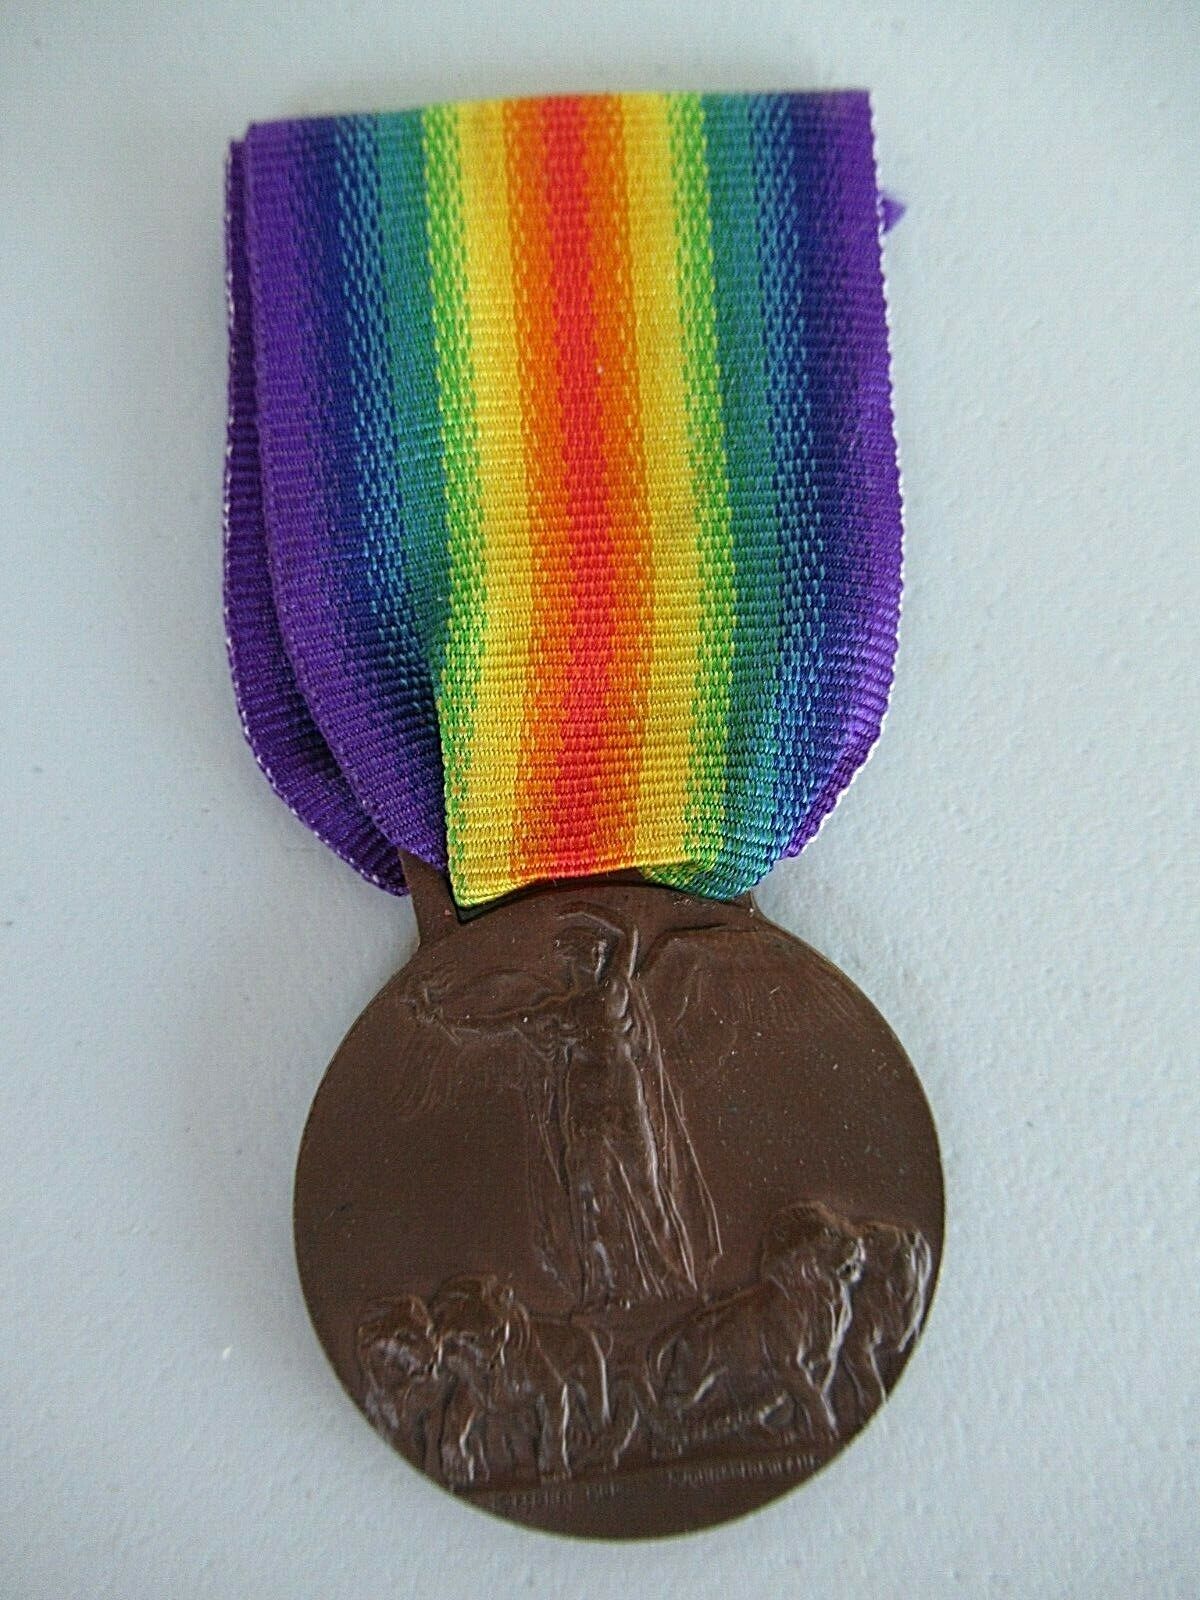 ITALY WWI VICTORY MEDAL WITH JOHNSON SIGNATURE. 1